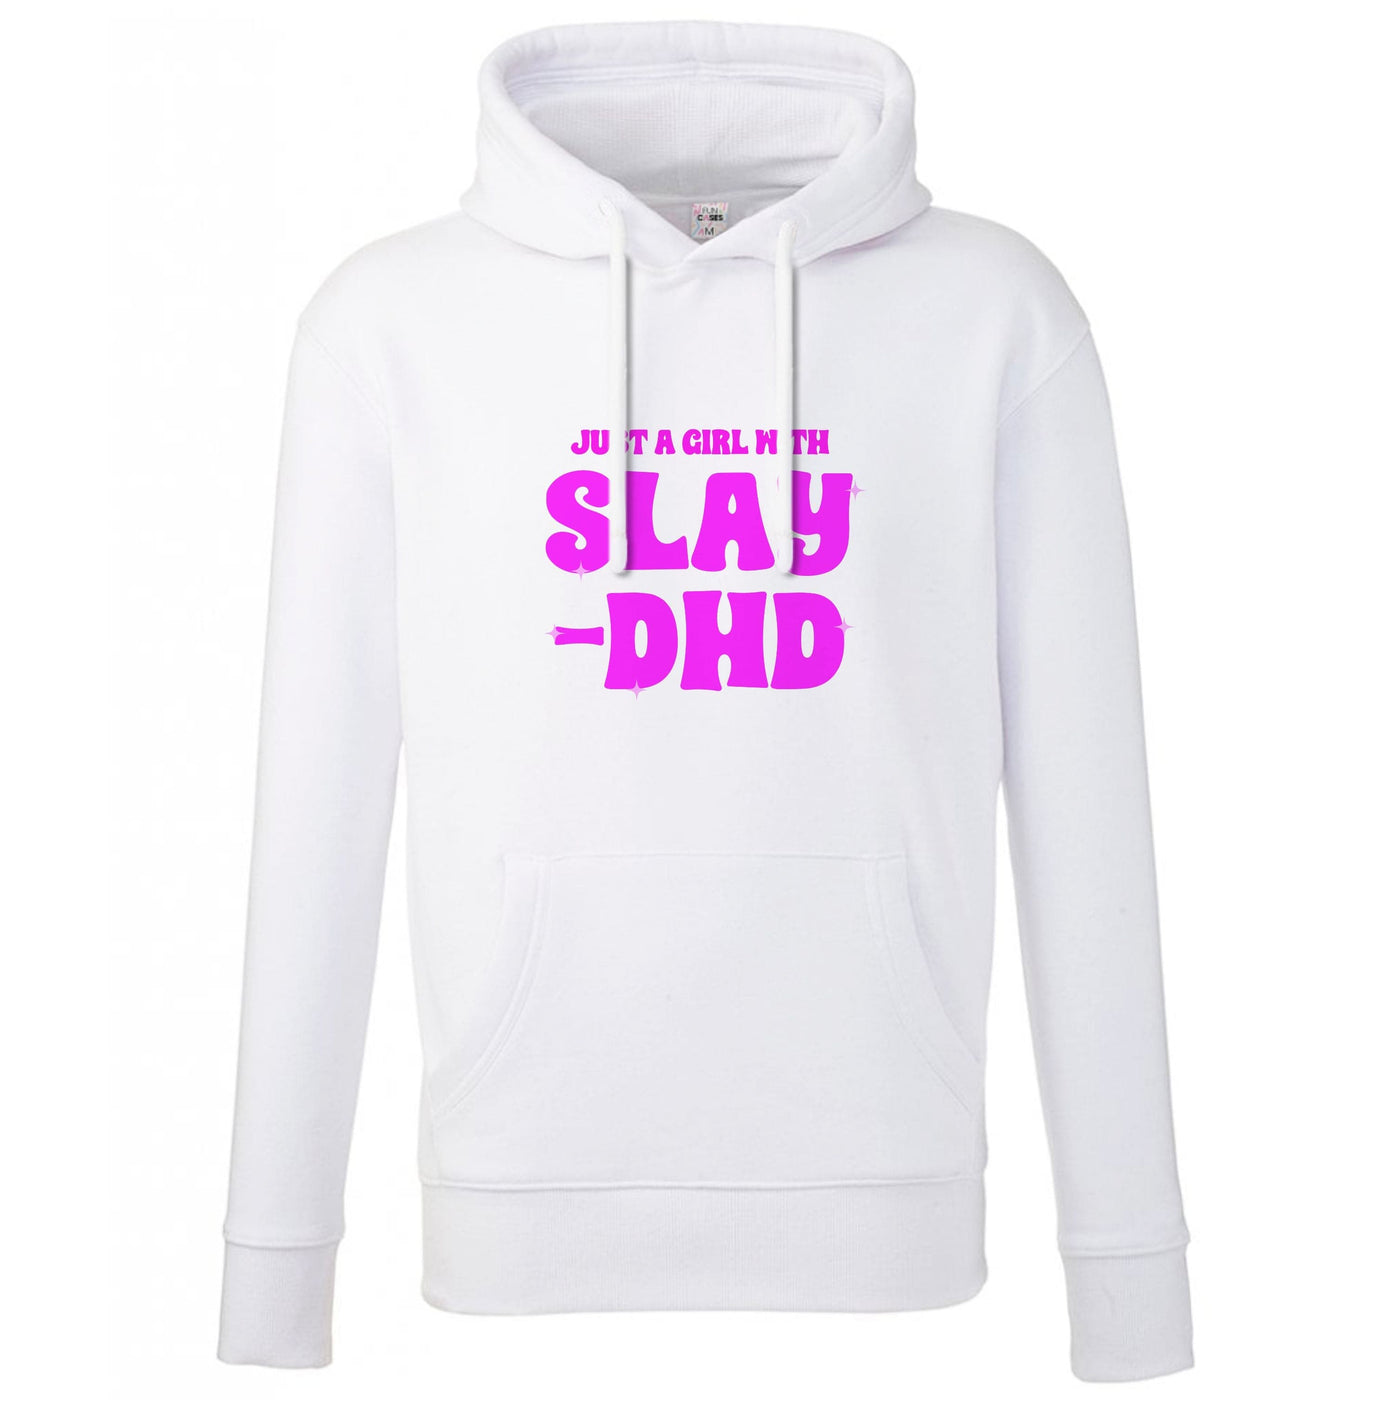 Just A Girl With Slay-DHD - TikTok Trends Hoodie